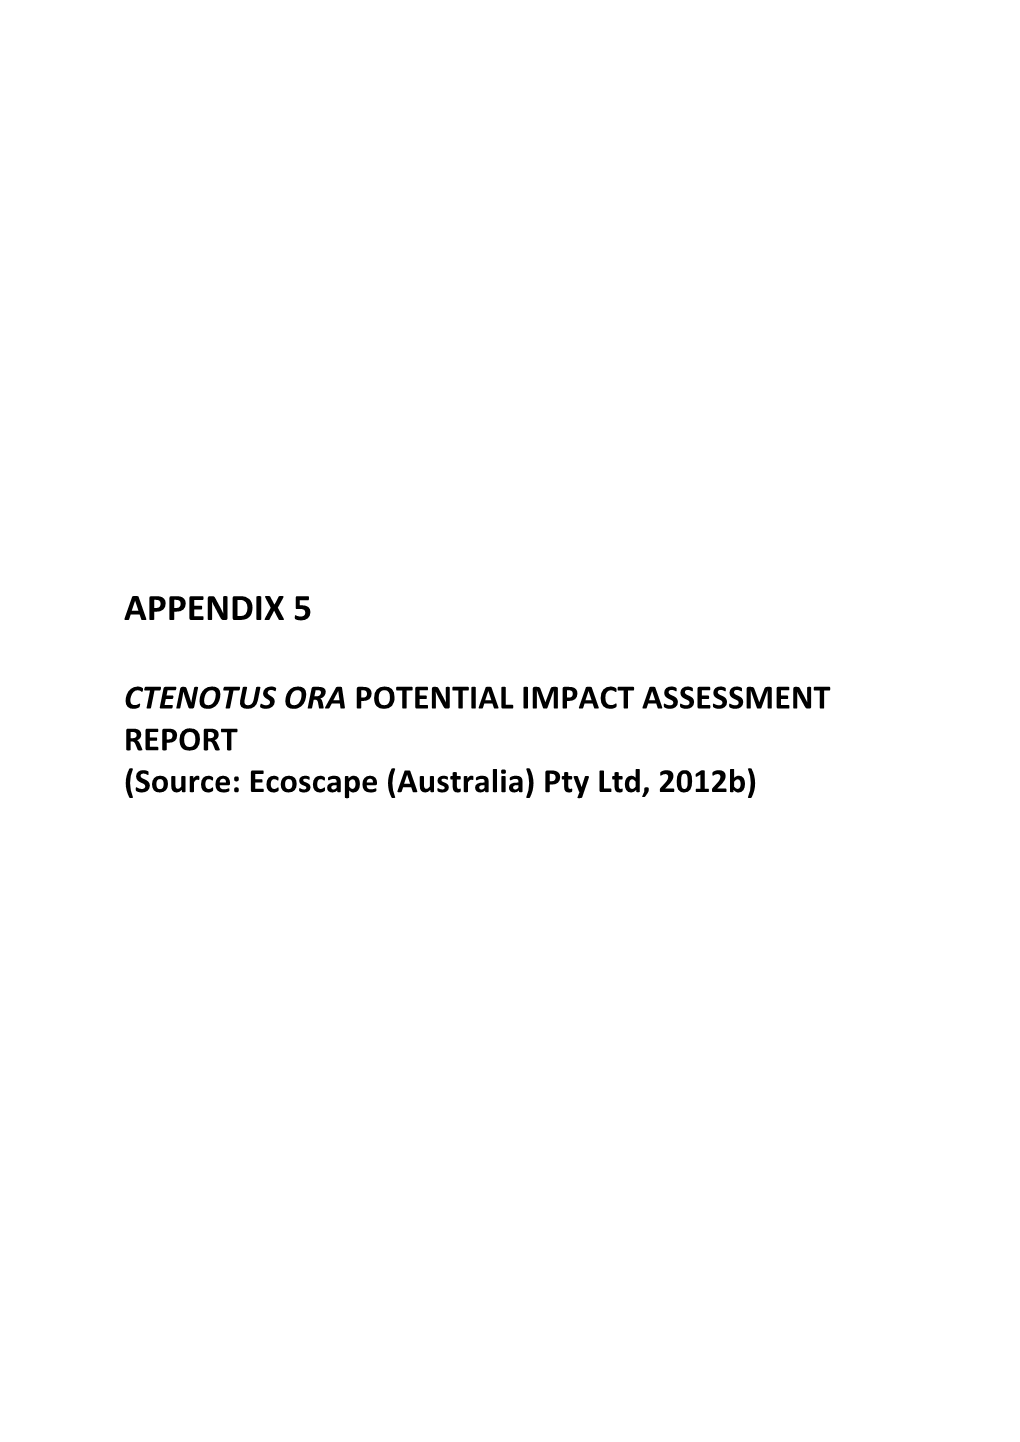 Environmental Management Plan Appendices 5 to 6